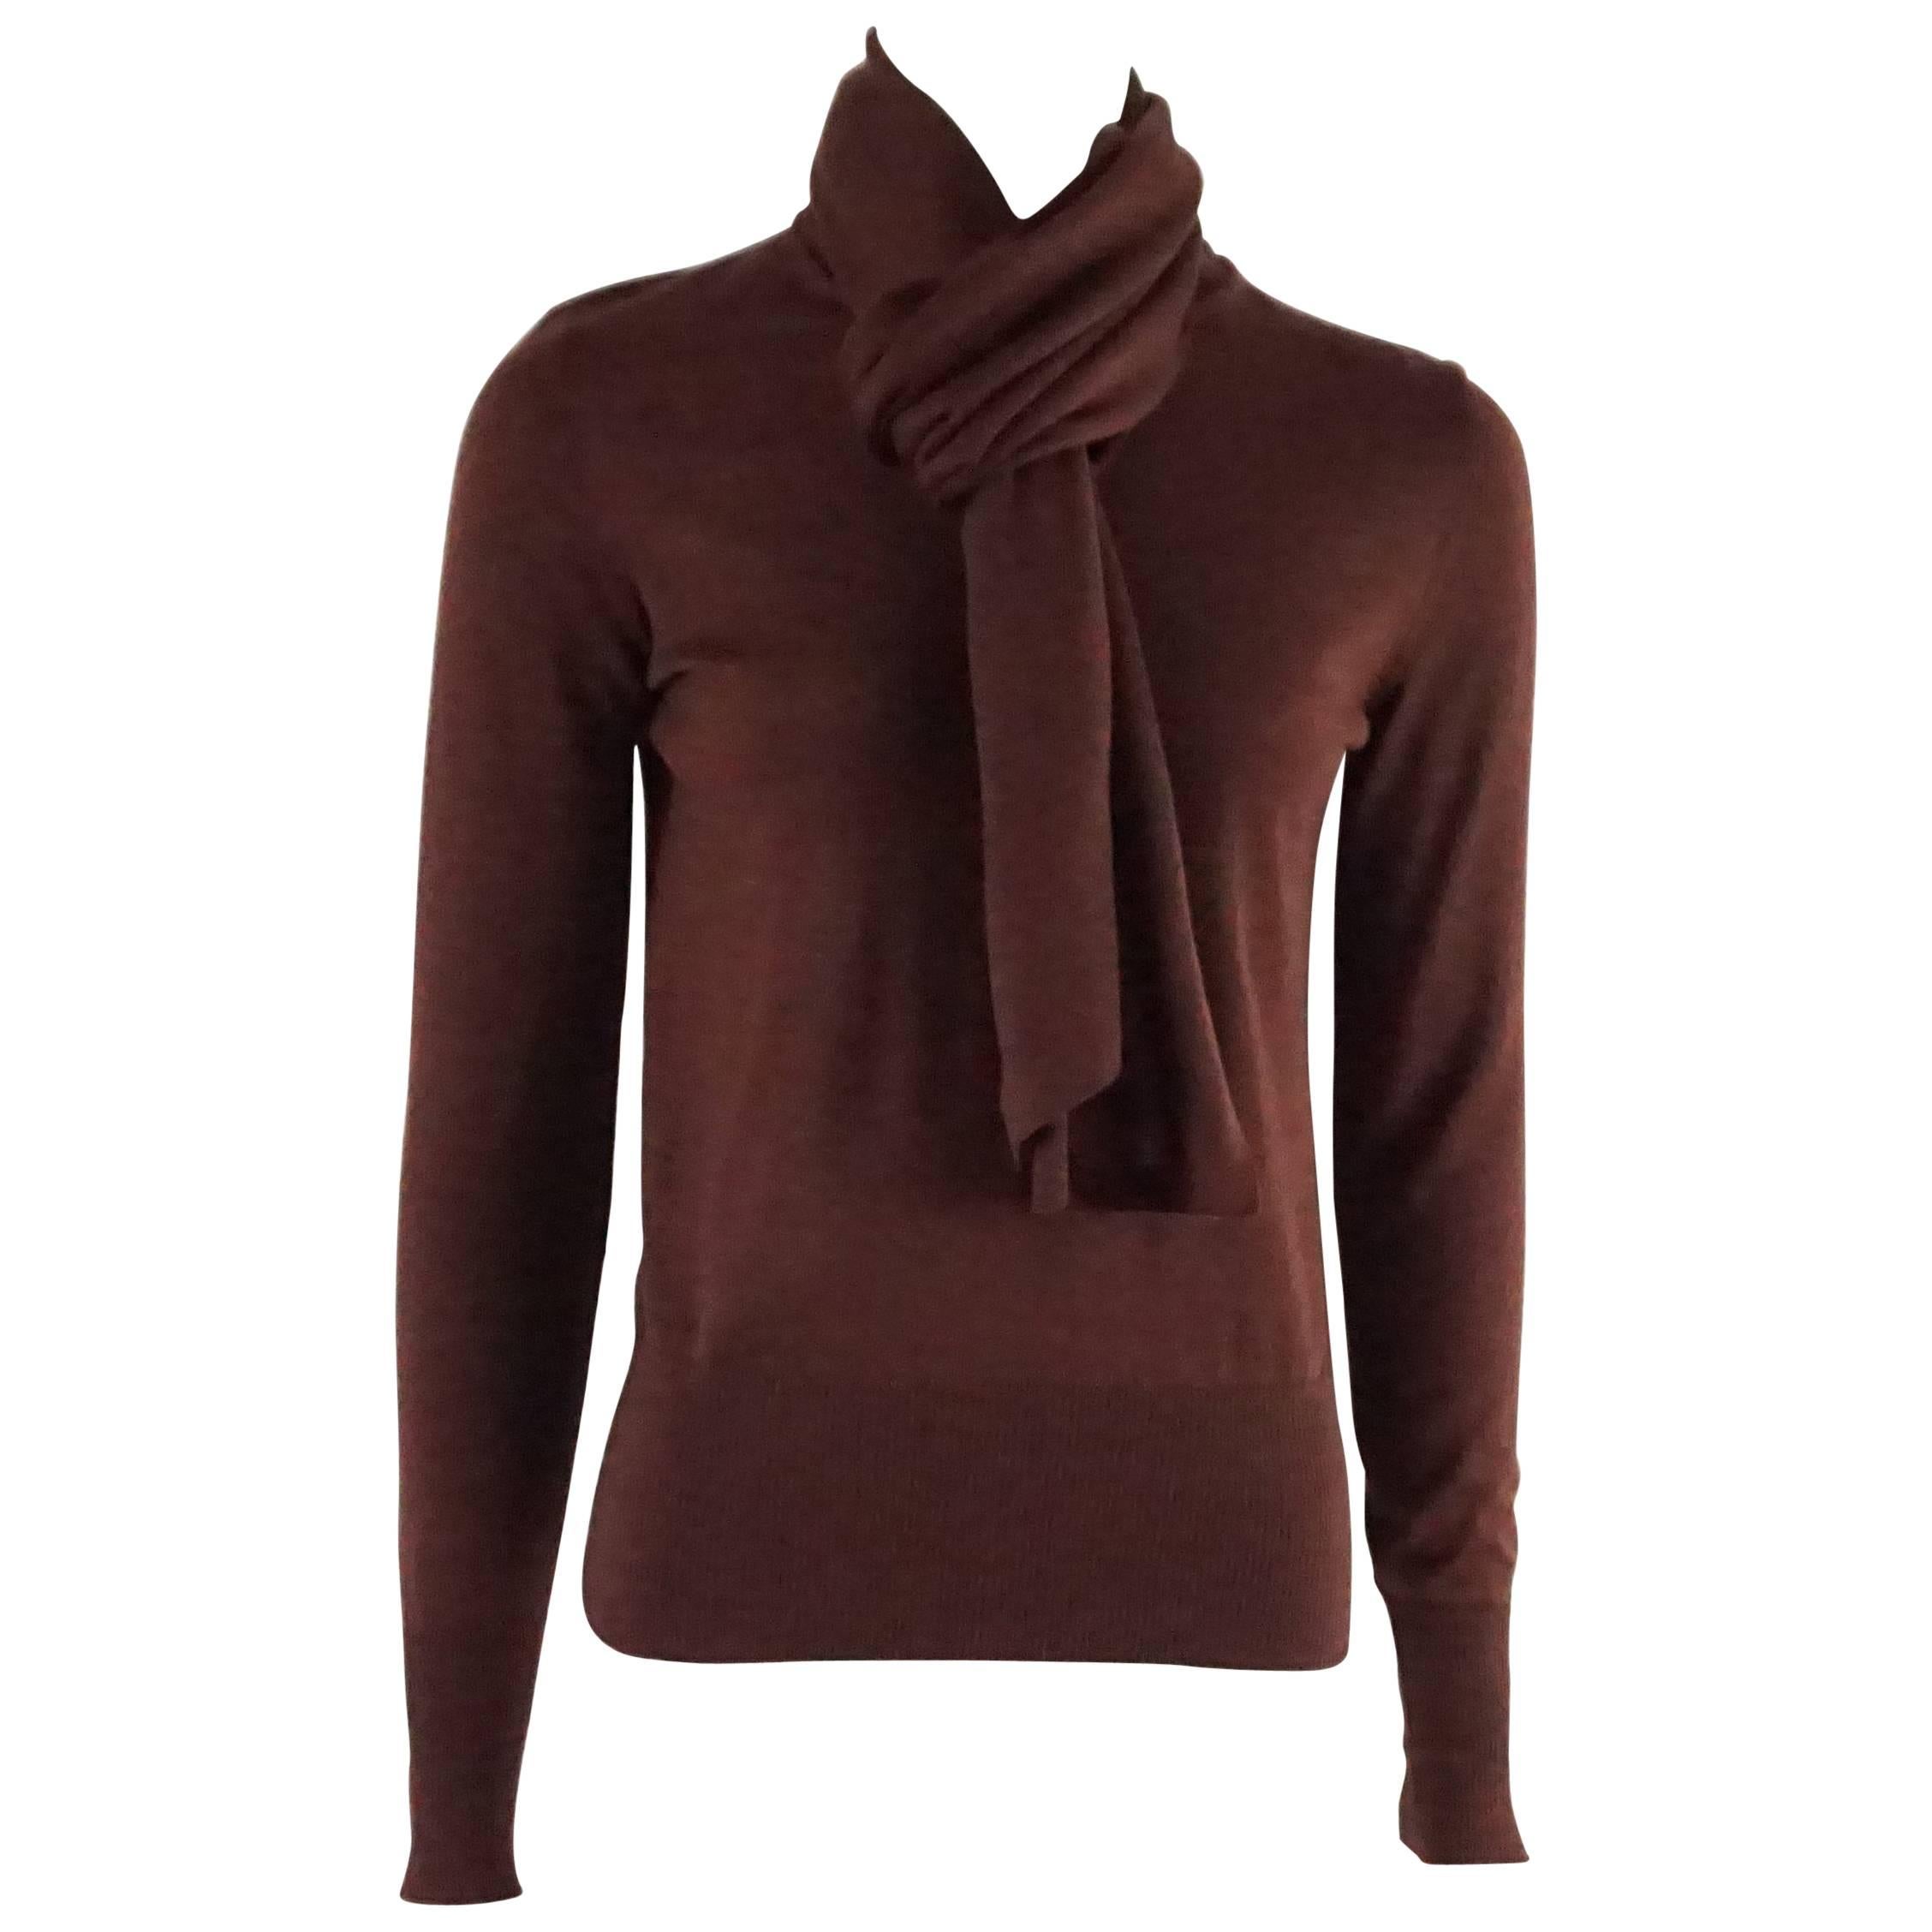 Hermes Burgundy Cashmere Sweater with Attached Scarf - 40 